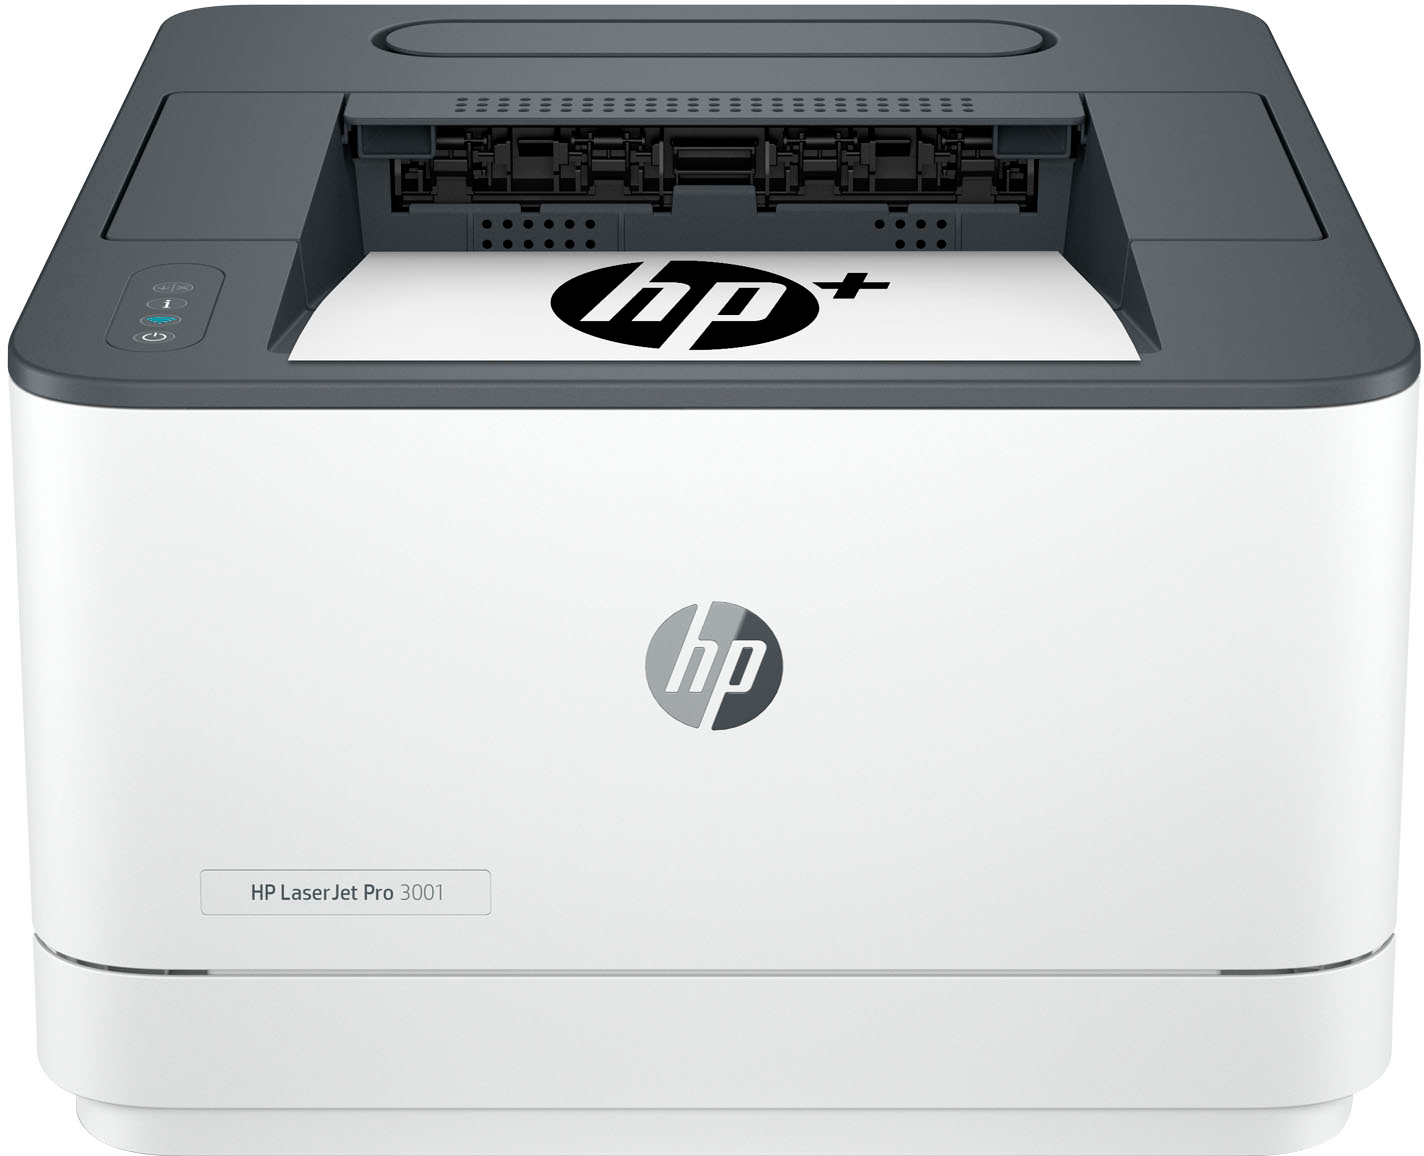 LaserJet Pro Wireless Black-and-White Laser Printer with 3 months of Instant Ink included with HP+ White Pro 3001dwe - Best Buy